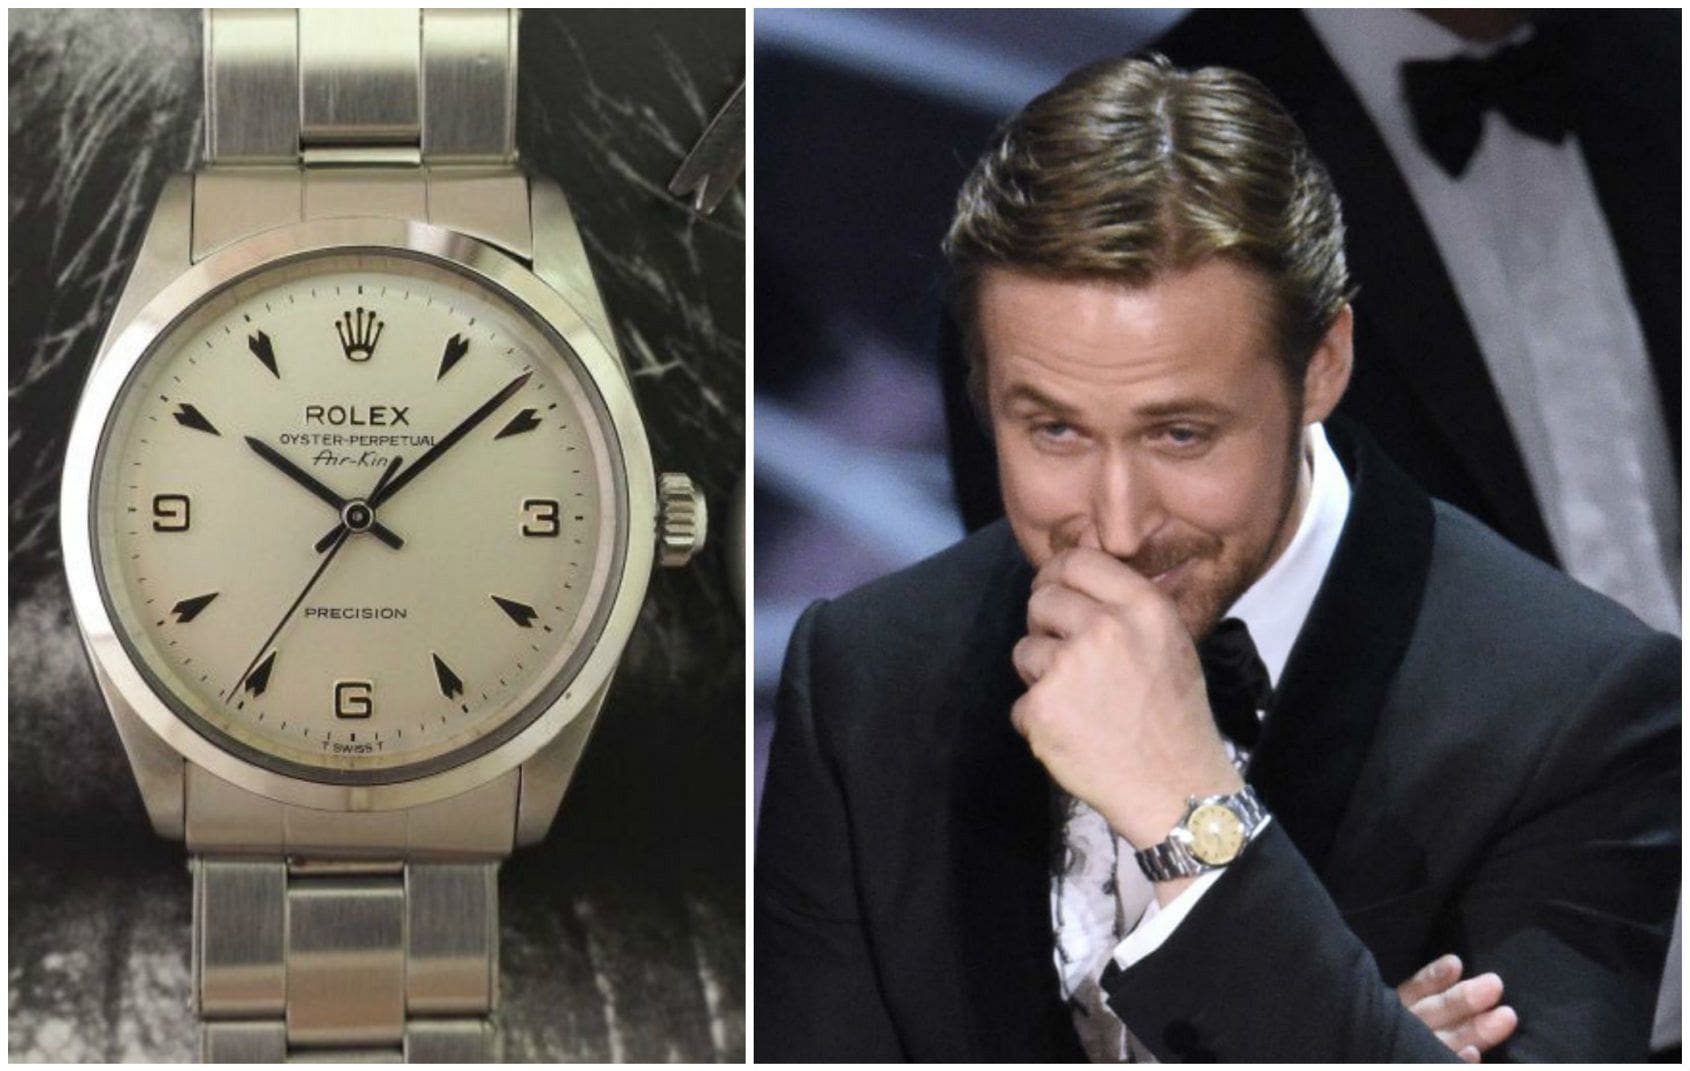 LIST: 5 standout Rolexes worn at the 89th Academy Awards (which they just happen to sponsor)